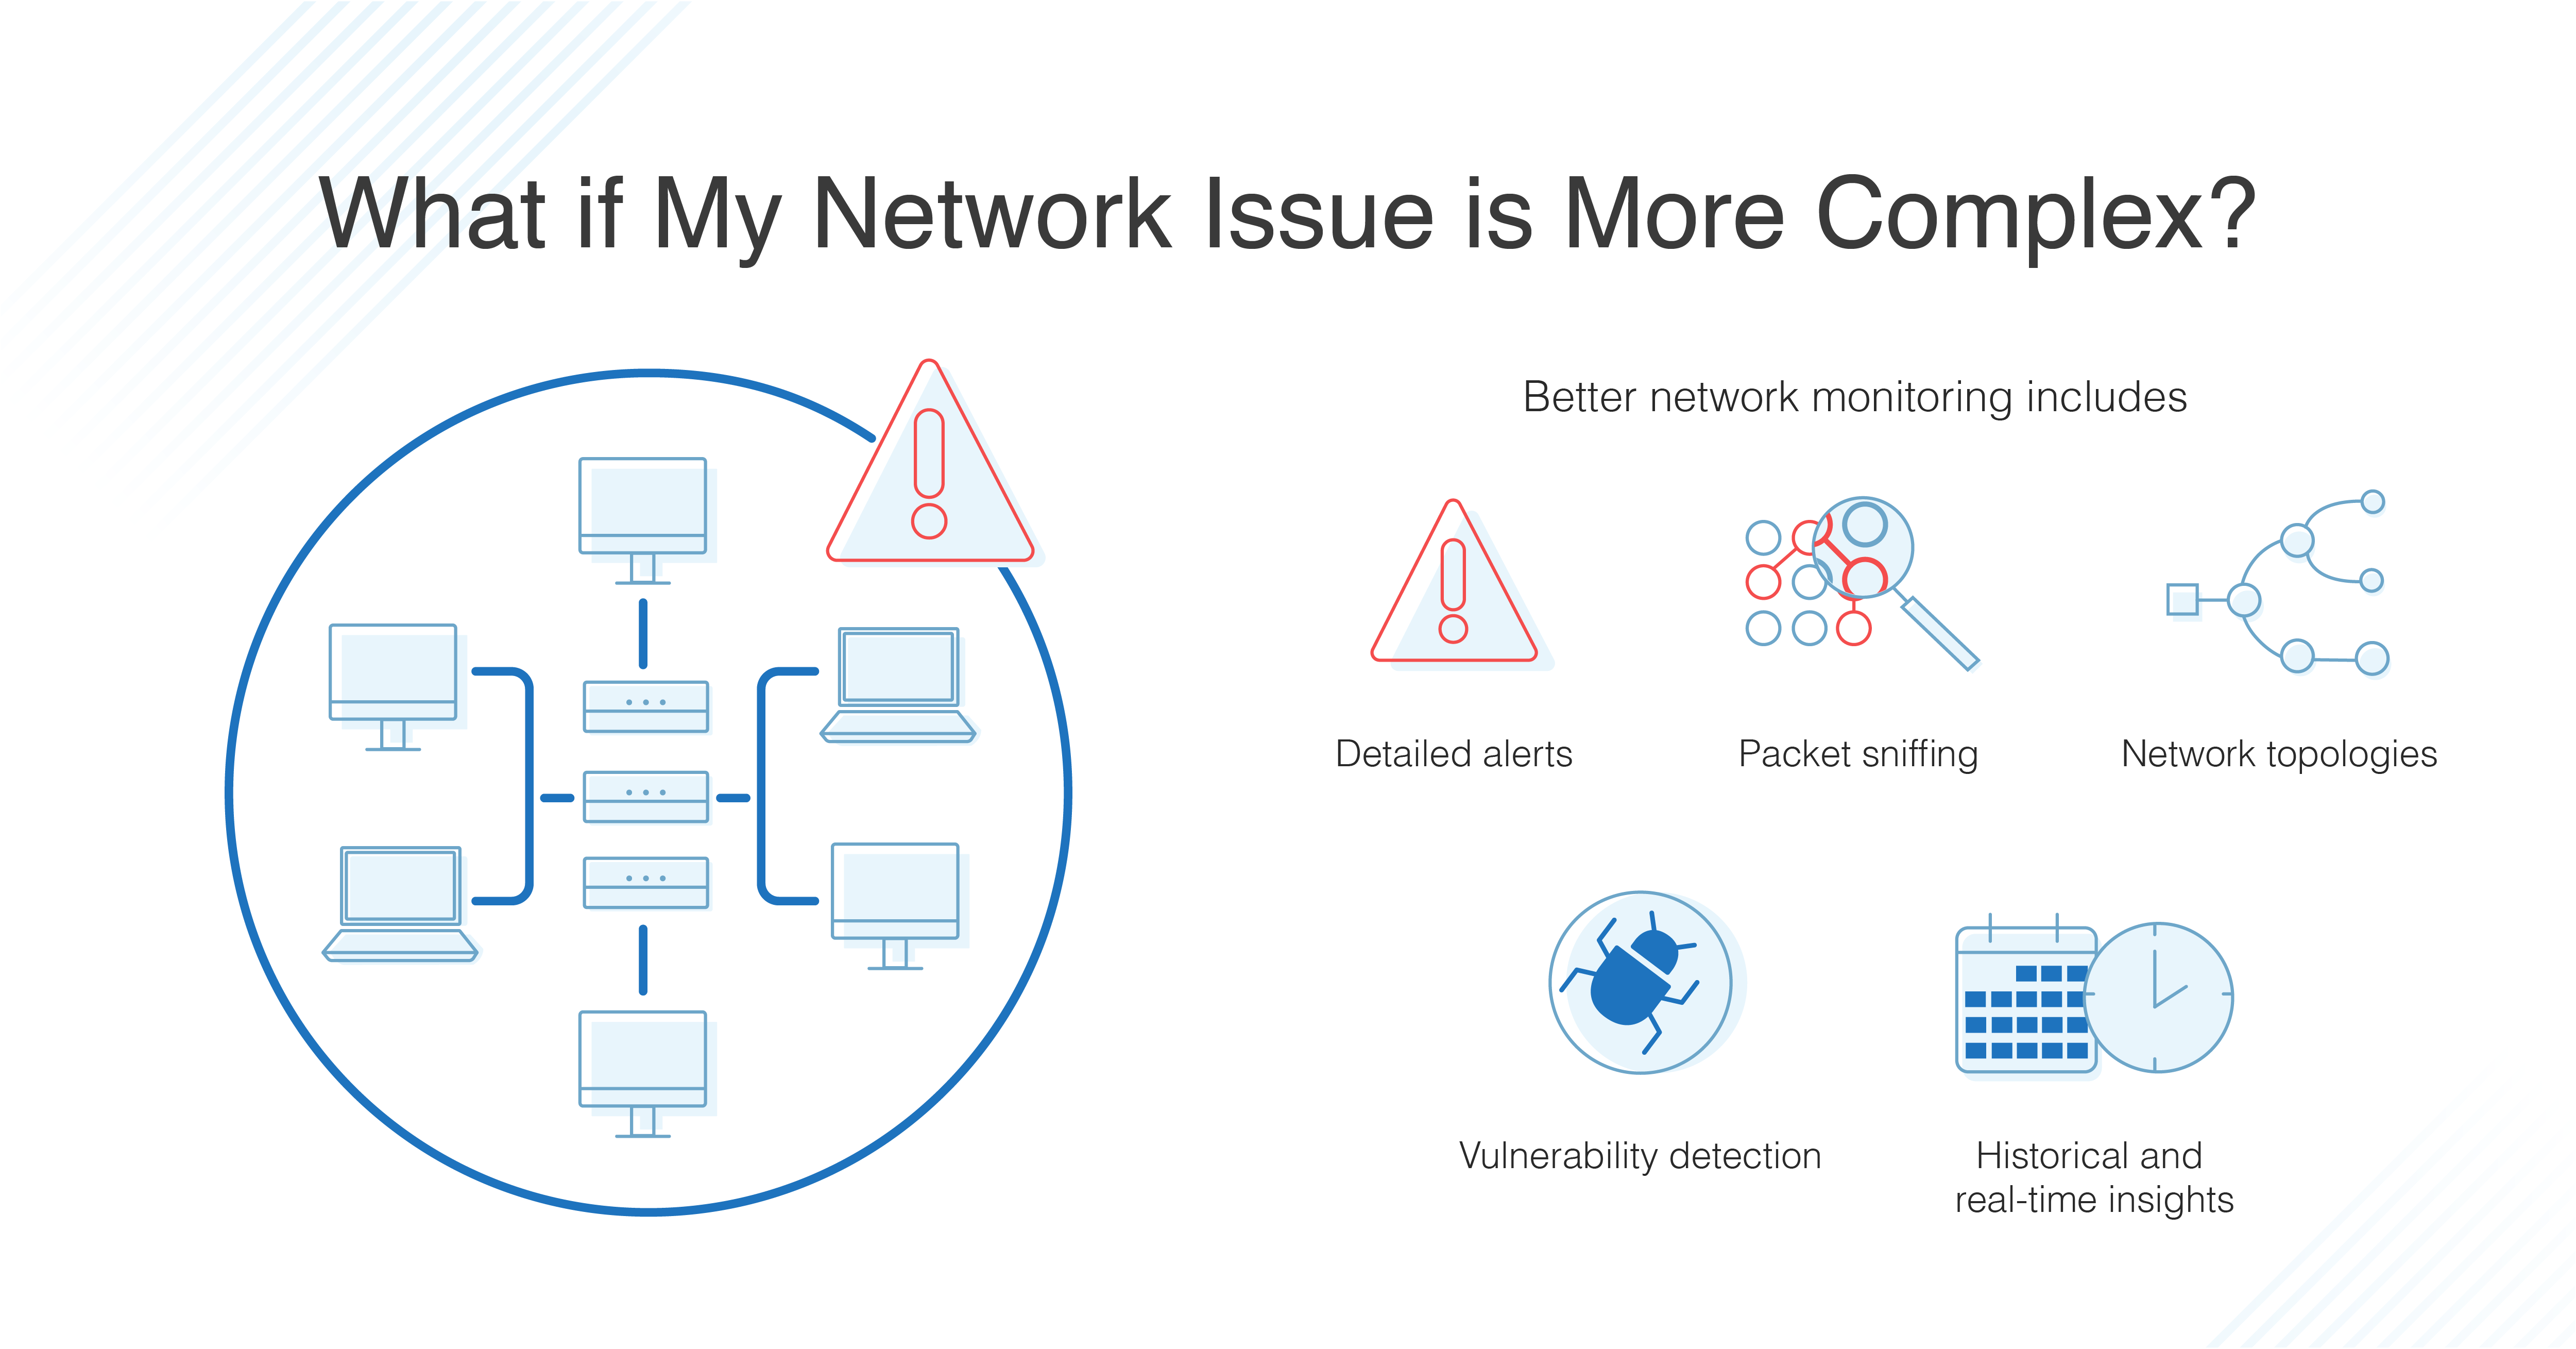 Network connectivity problems: Issues related to establishing a stable connection with the network.
Data retrieval failures: Difficulties encountered when trying to retrieve data through BACnet Browser - fe.vshost.exe.